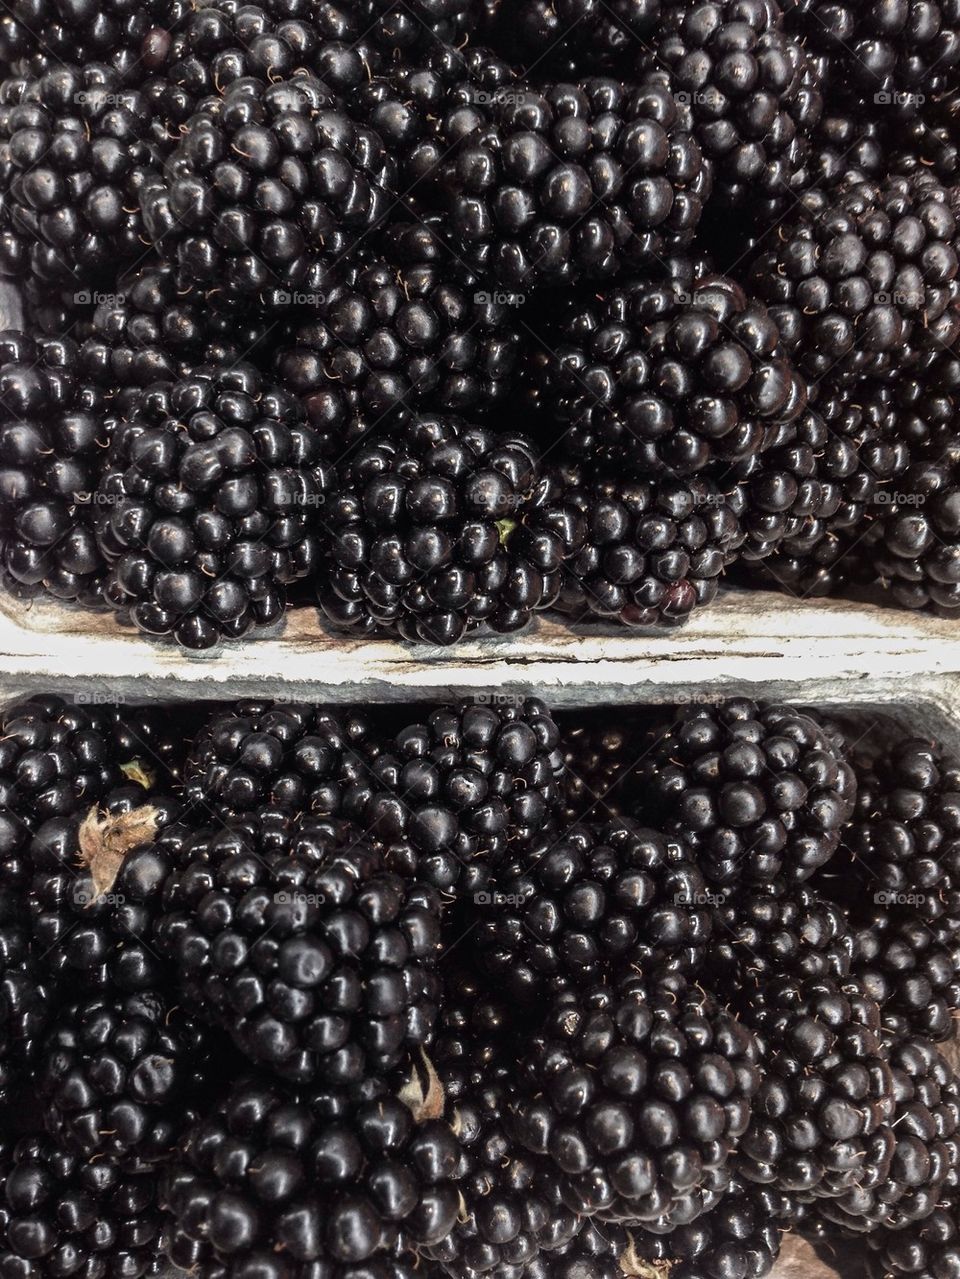 Extreme close-up of blackberries